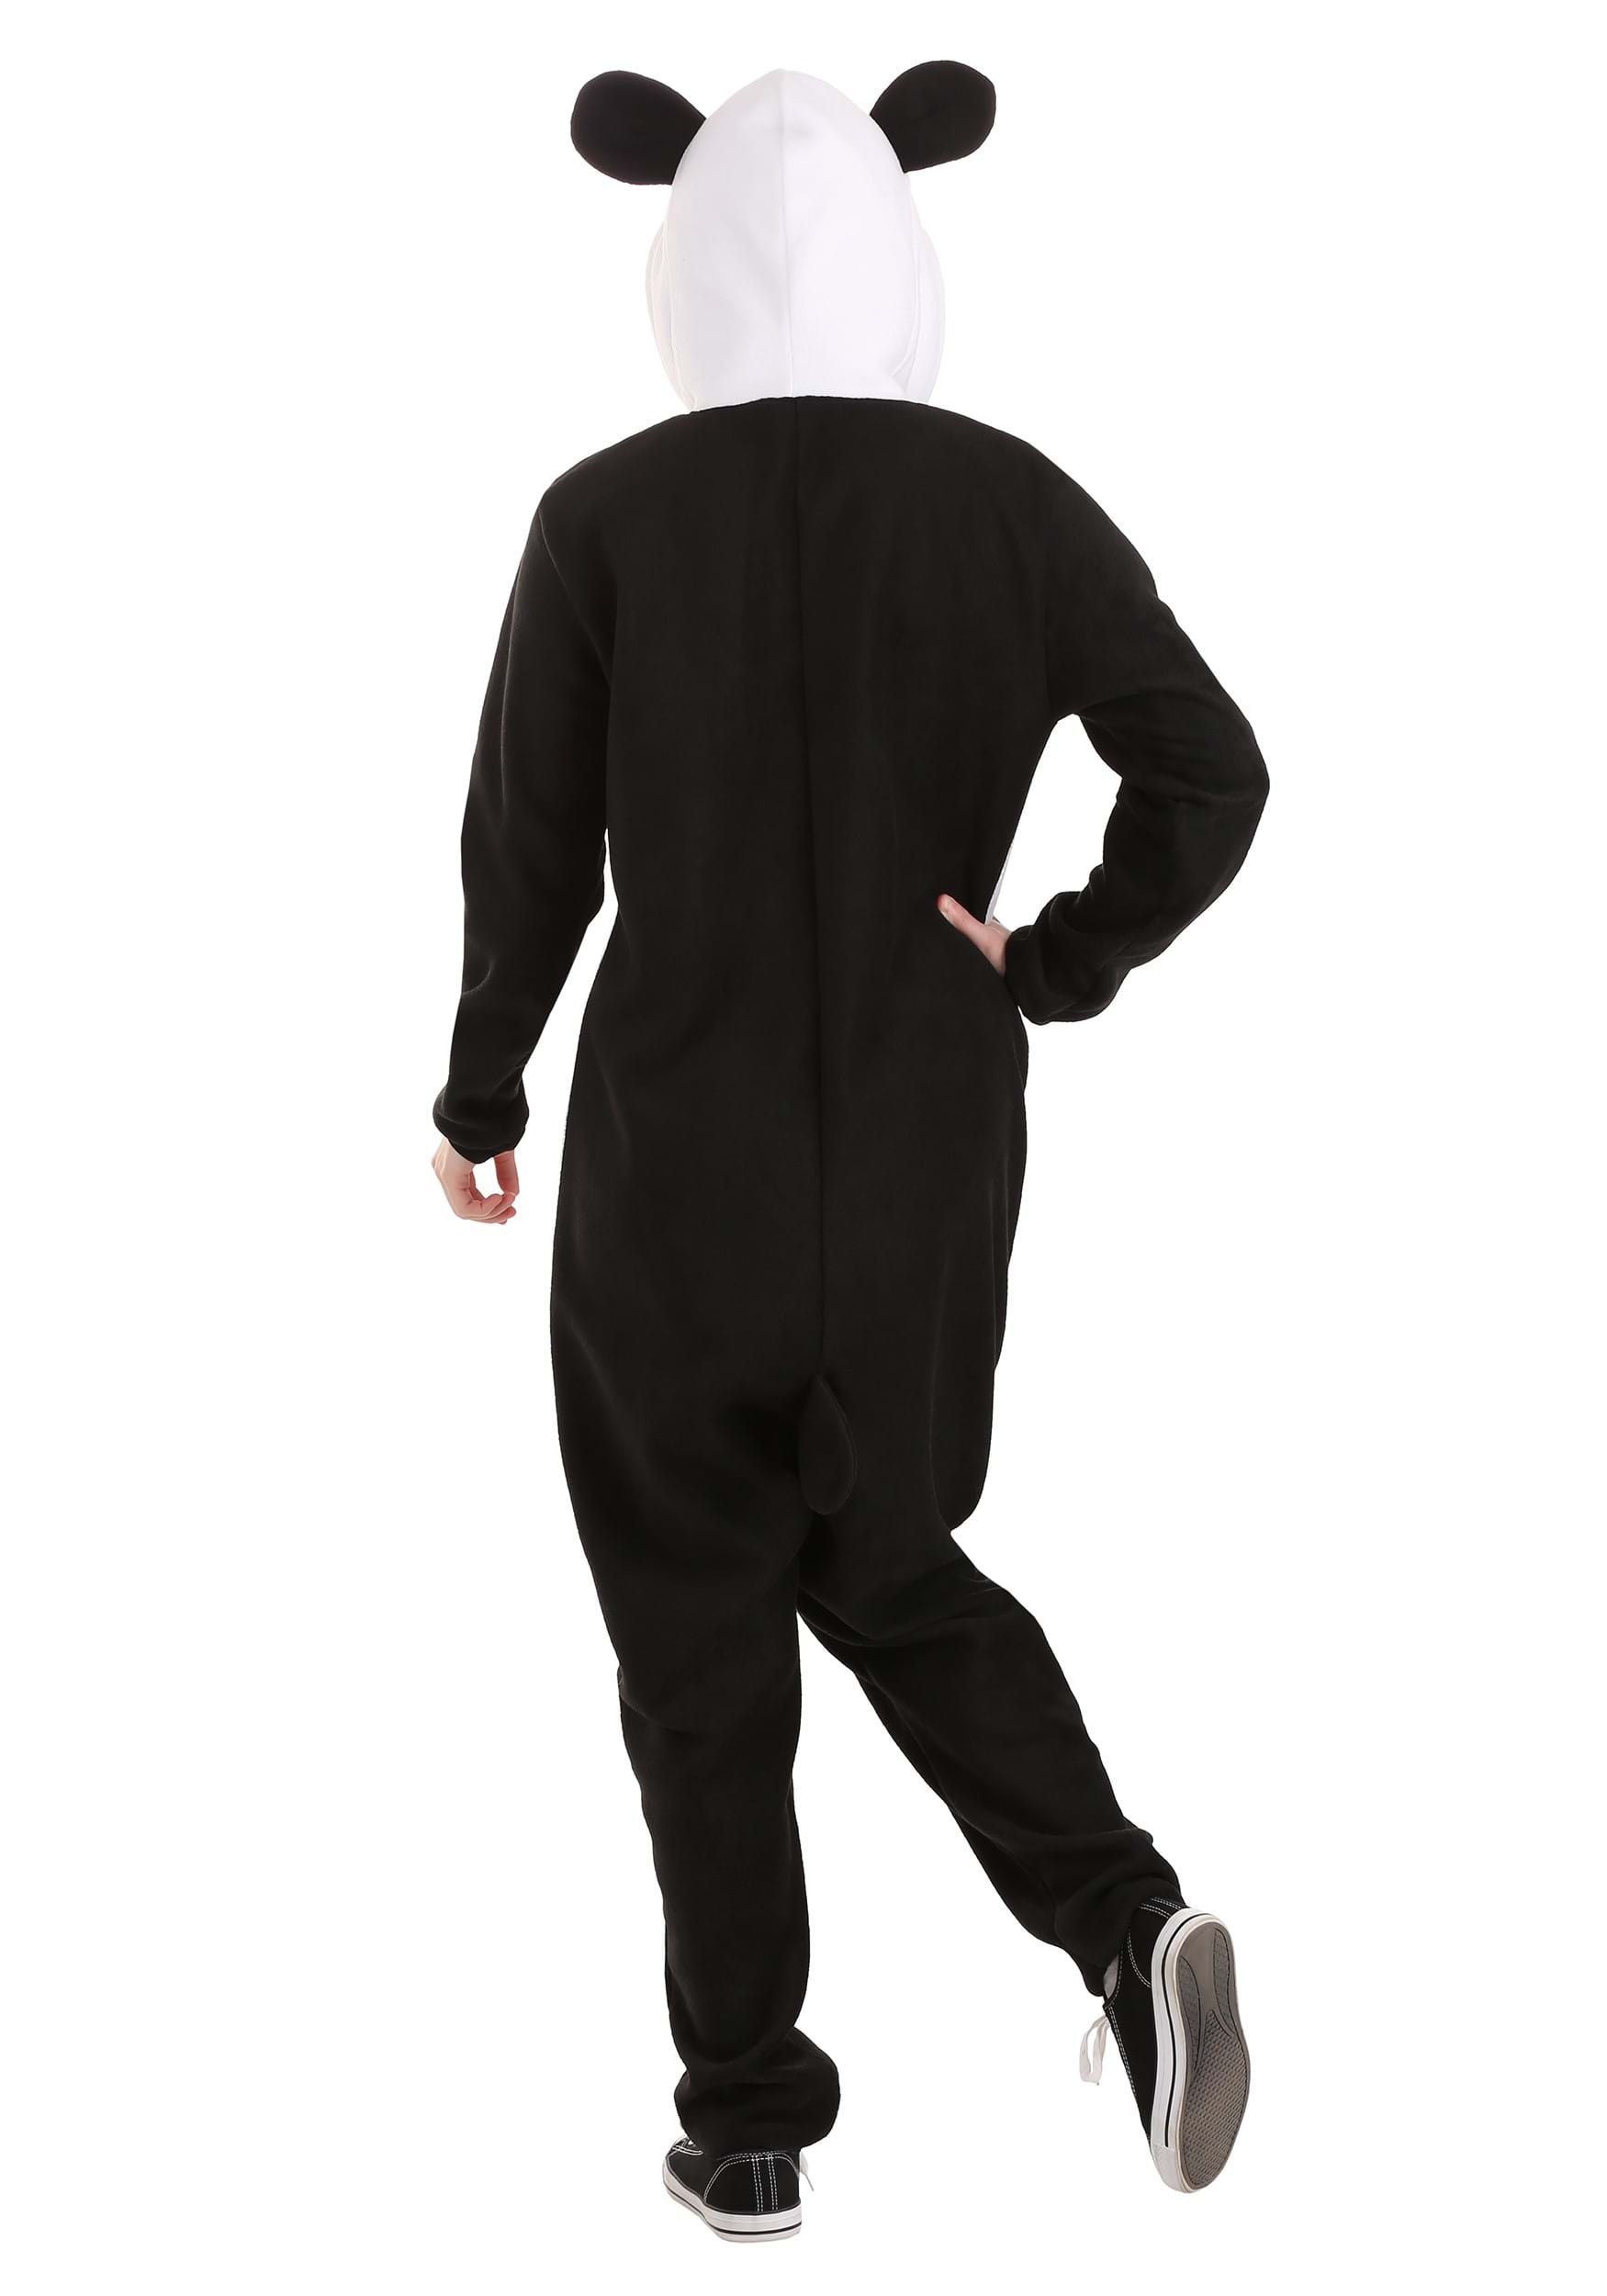 Panda Onesie For Adults